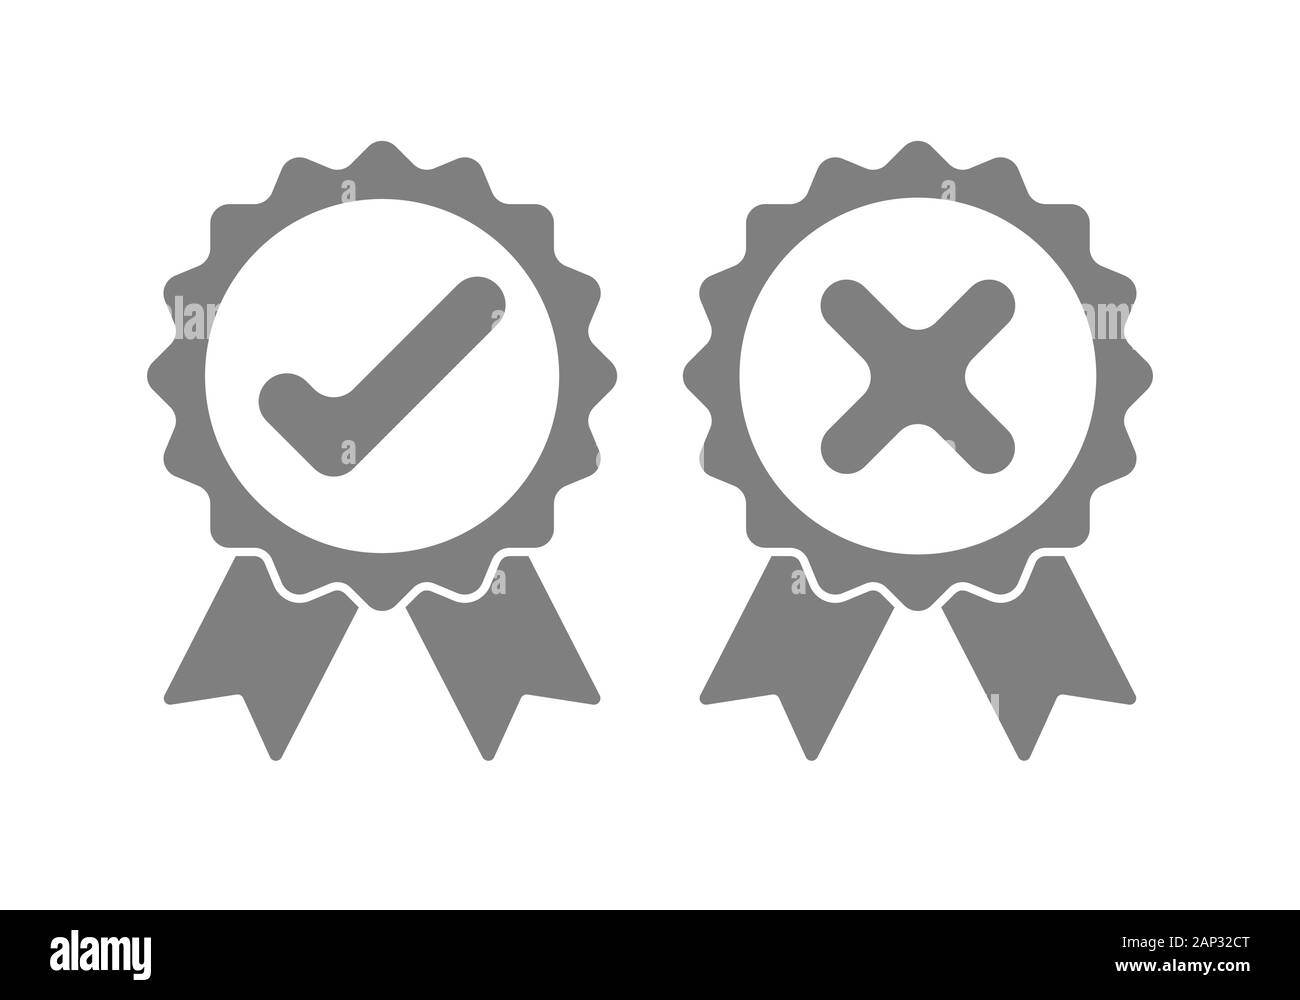 Gray approved and rejected icons. Check mark and cross mark on white background. Vector illustration. Stock Vector